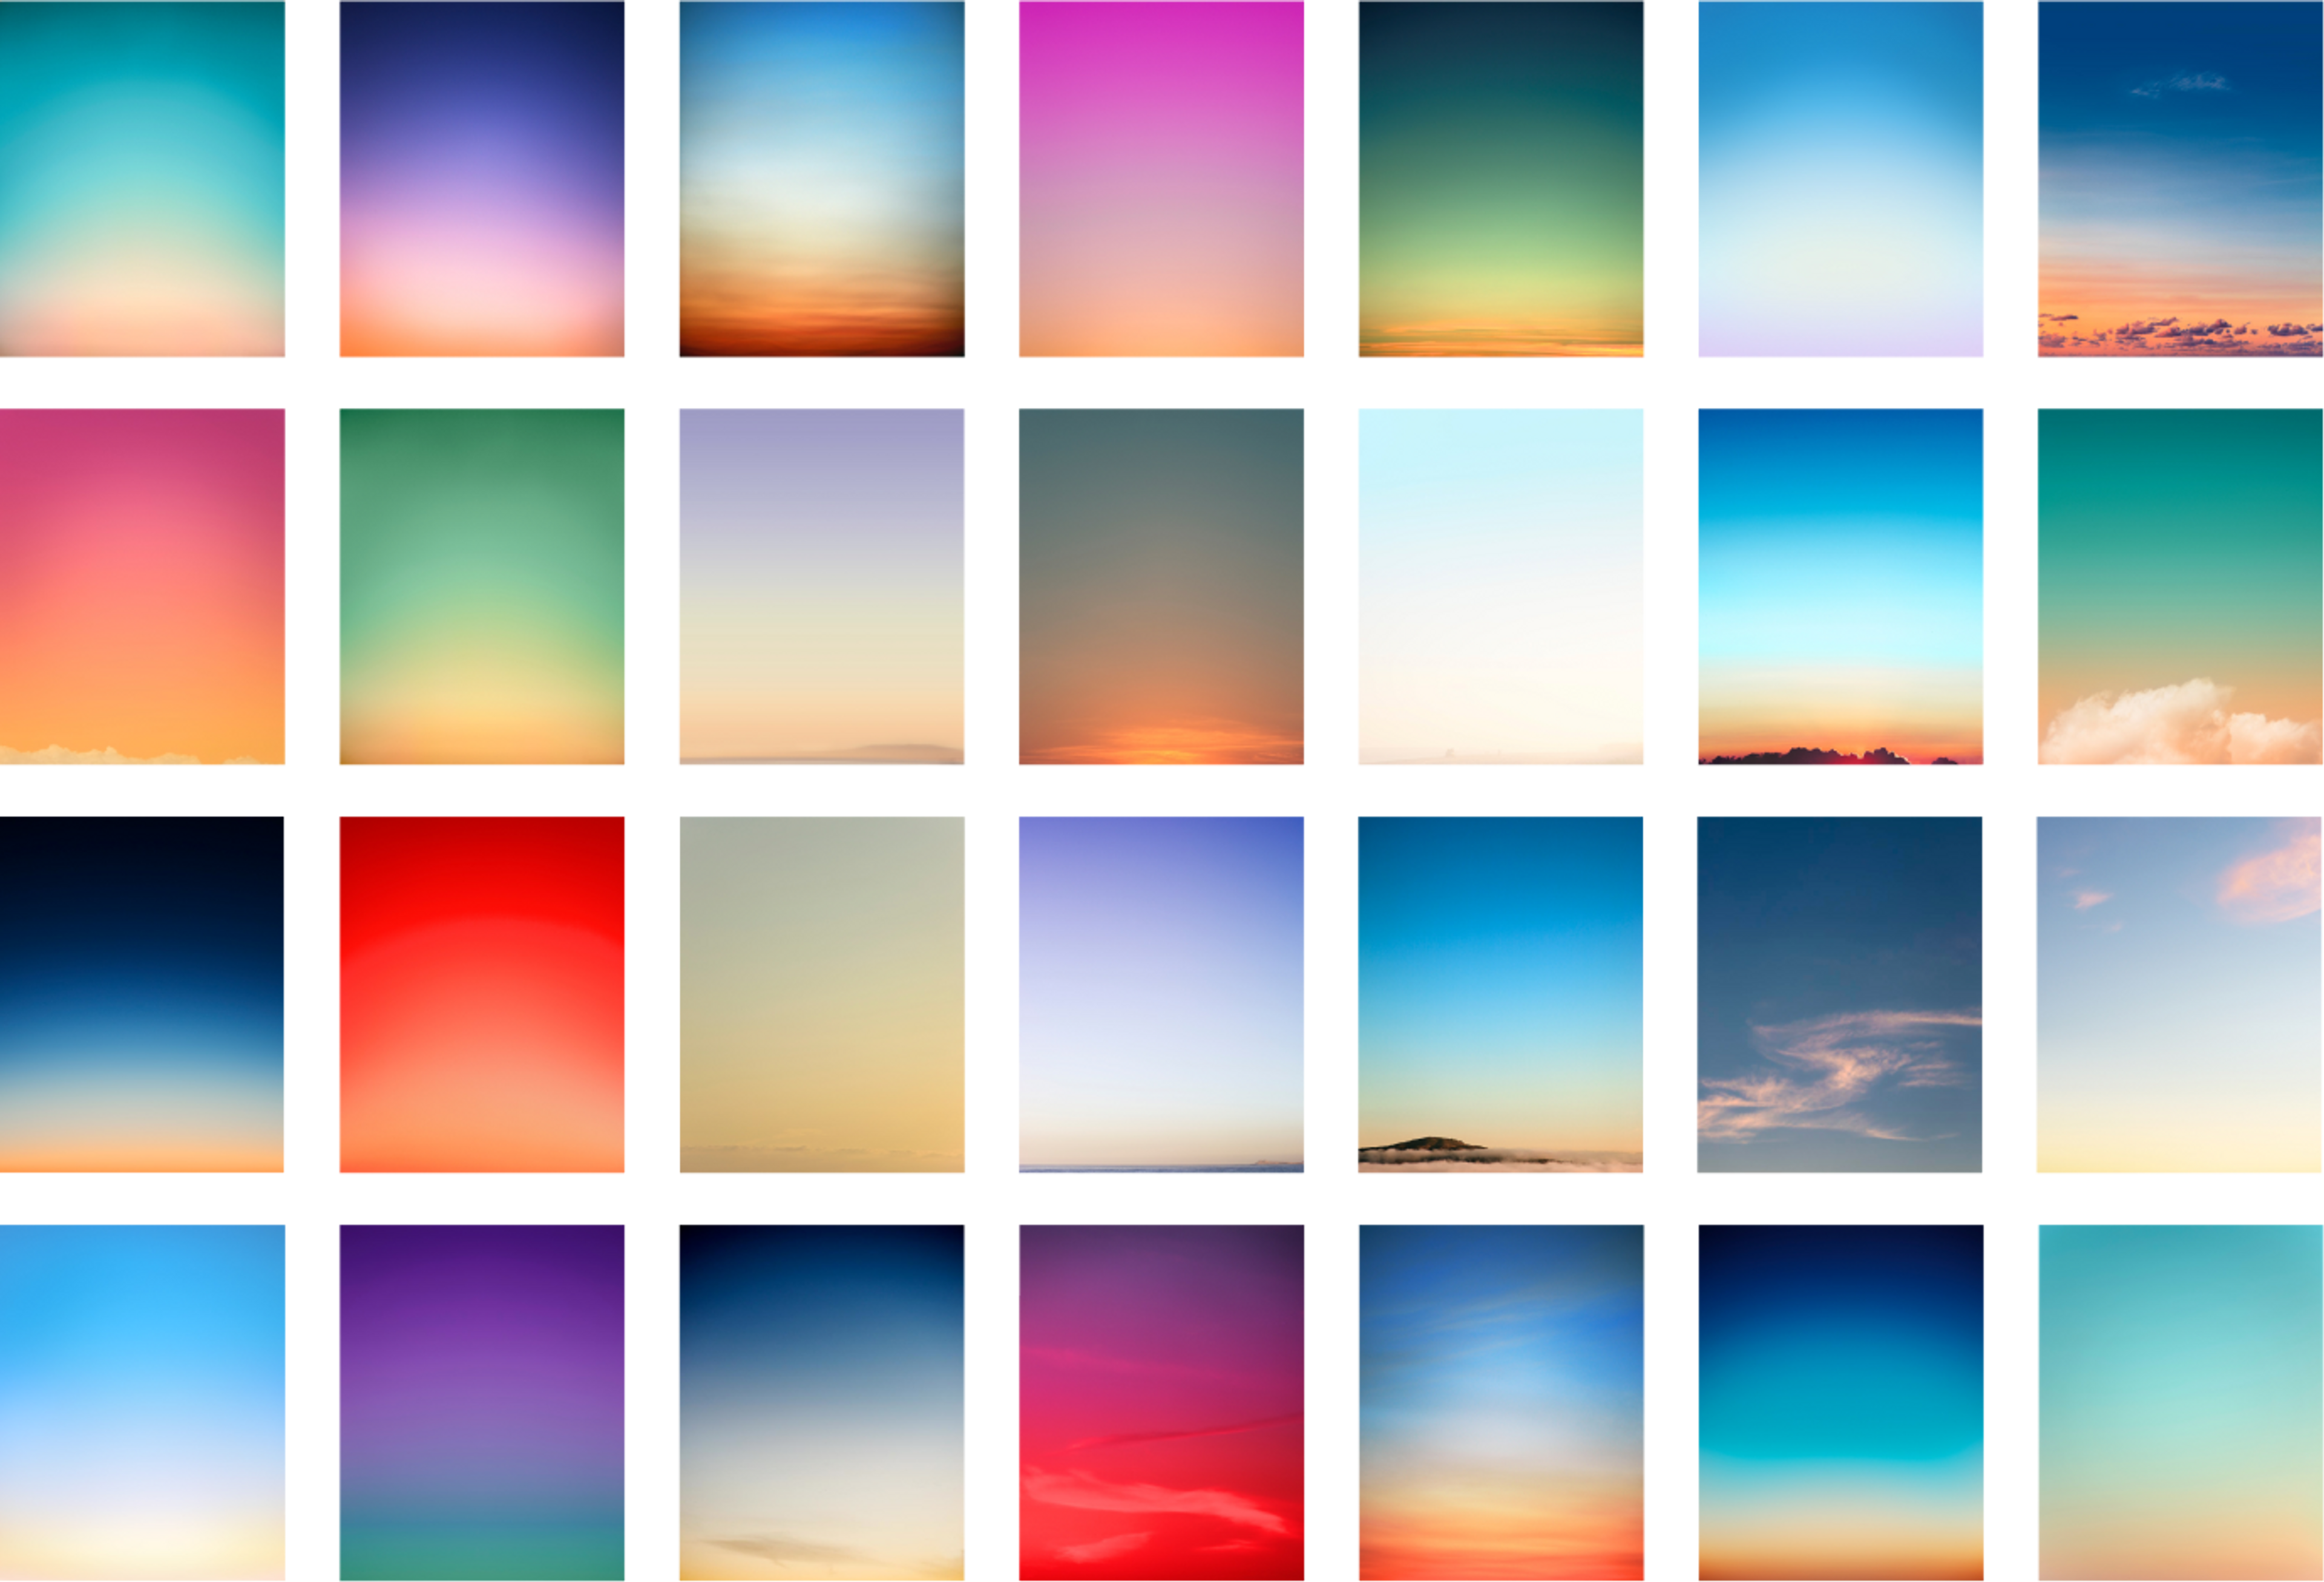 Collection of many different sunset photos with many gradients and colors